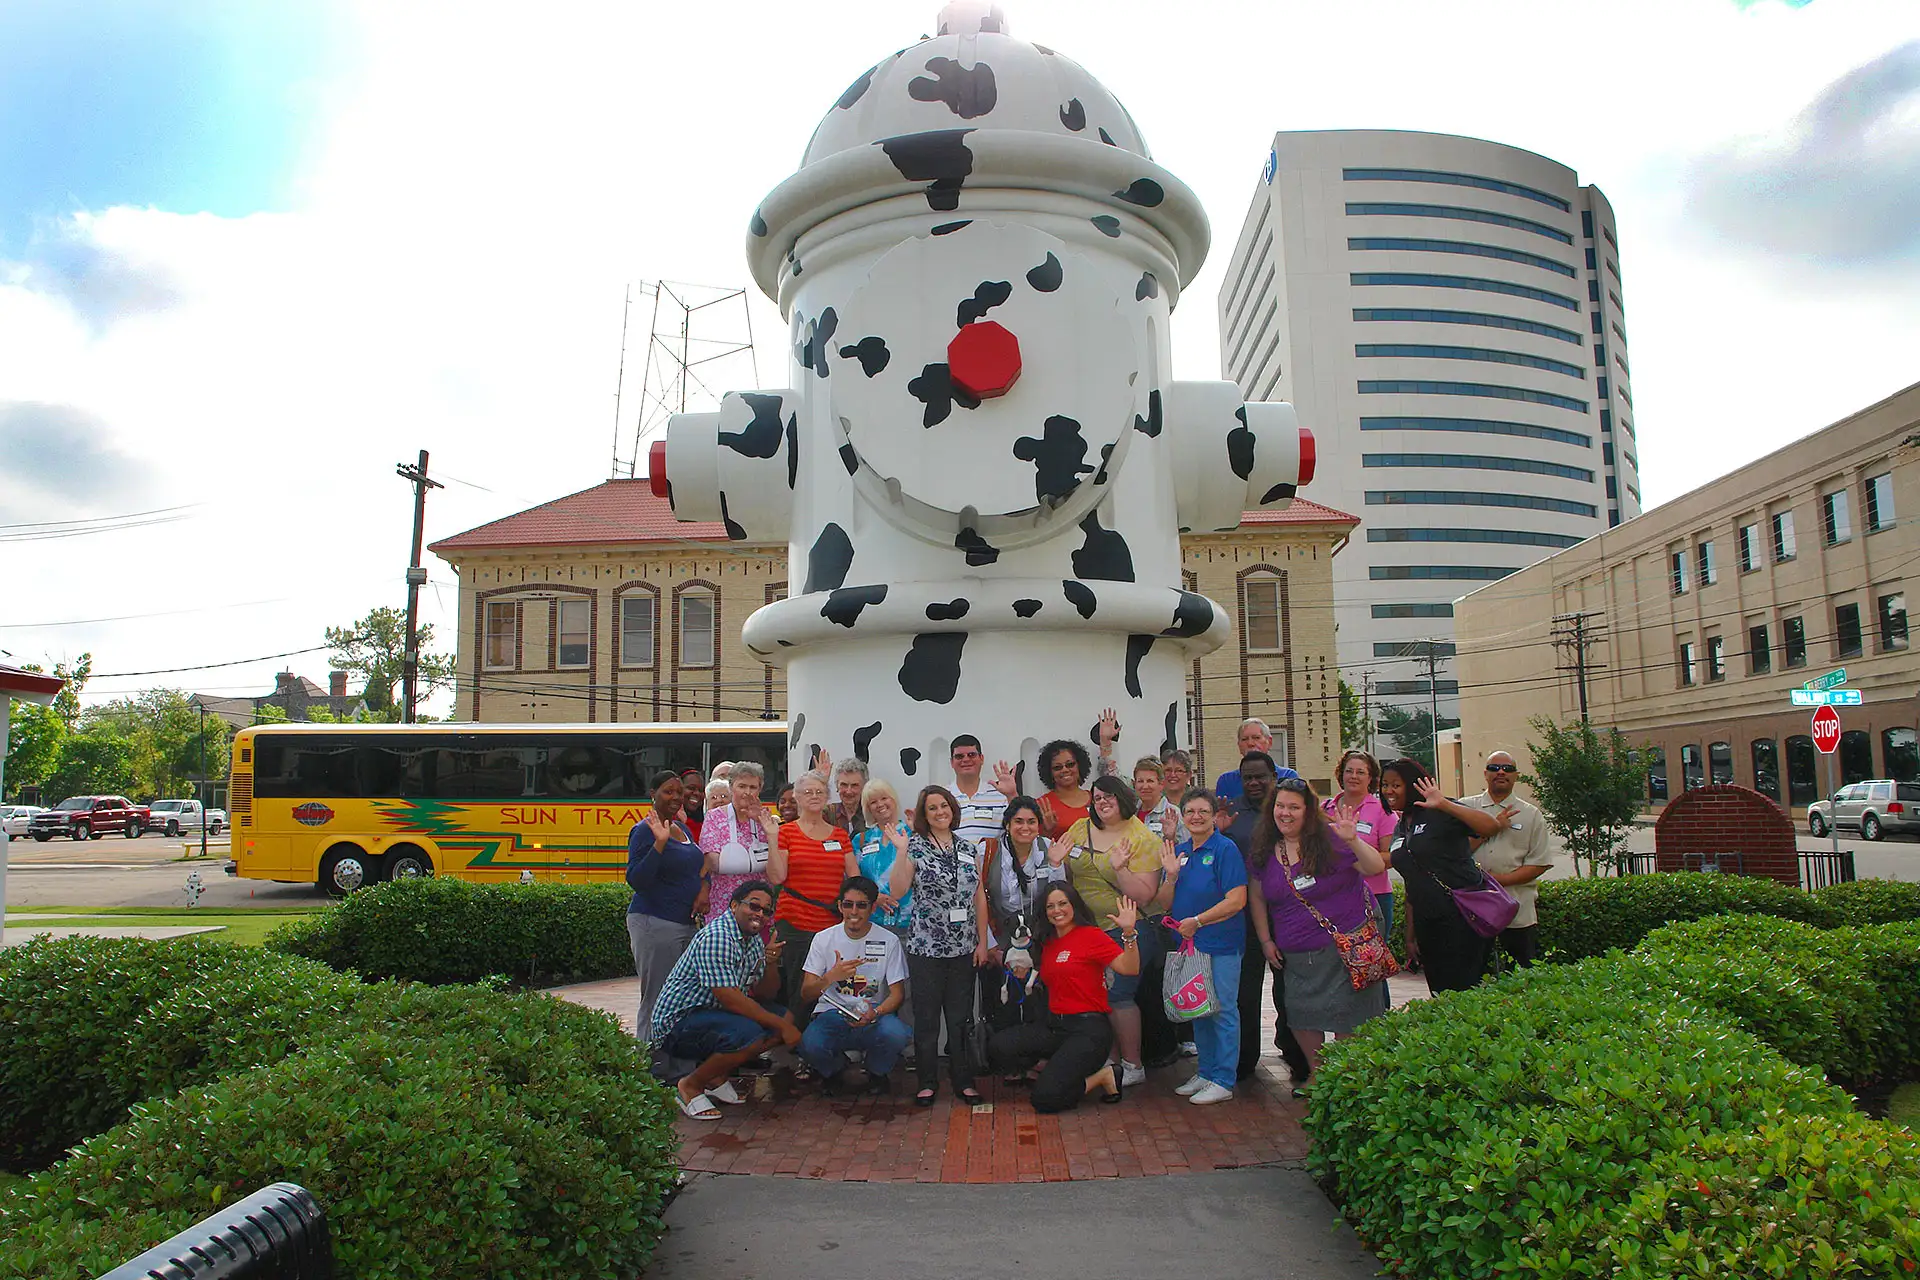 Giant Fire Hydrant in Beaumont, Texas; Courtesy of Beaumont Convent and Visitors Bureau